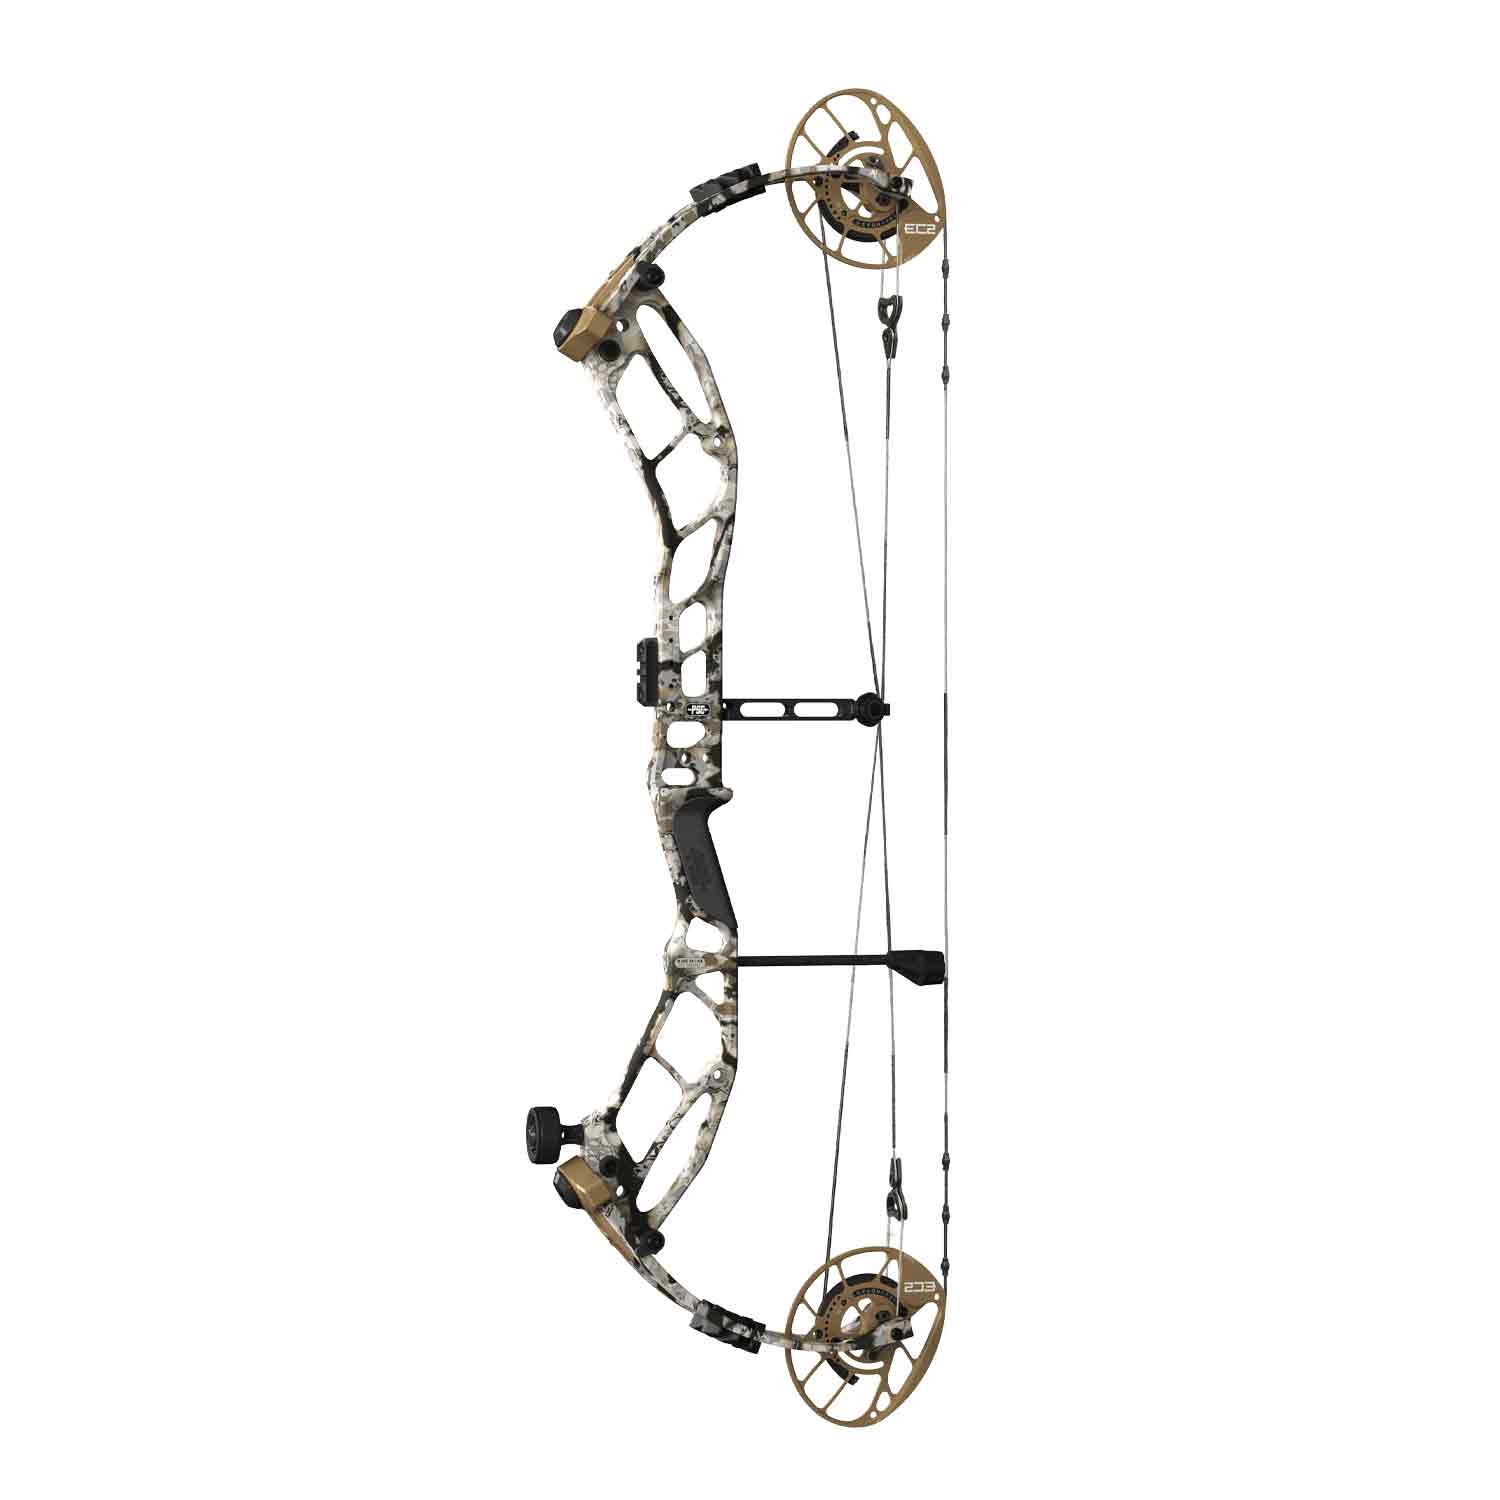 PSE Evolve DS 33 Compound Hunting Bow